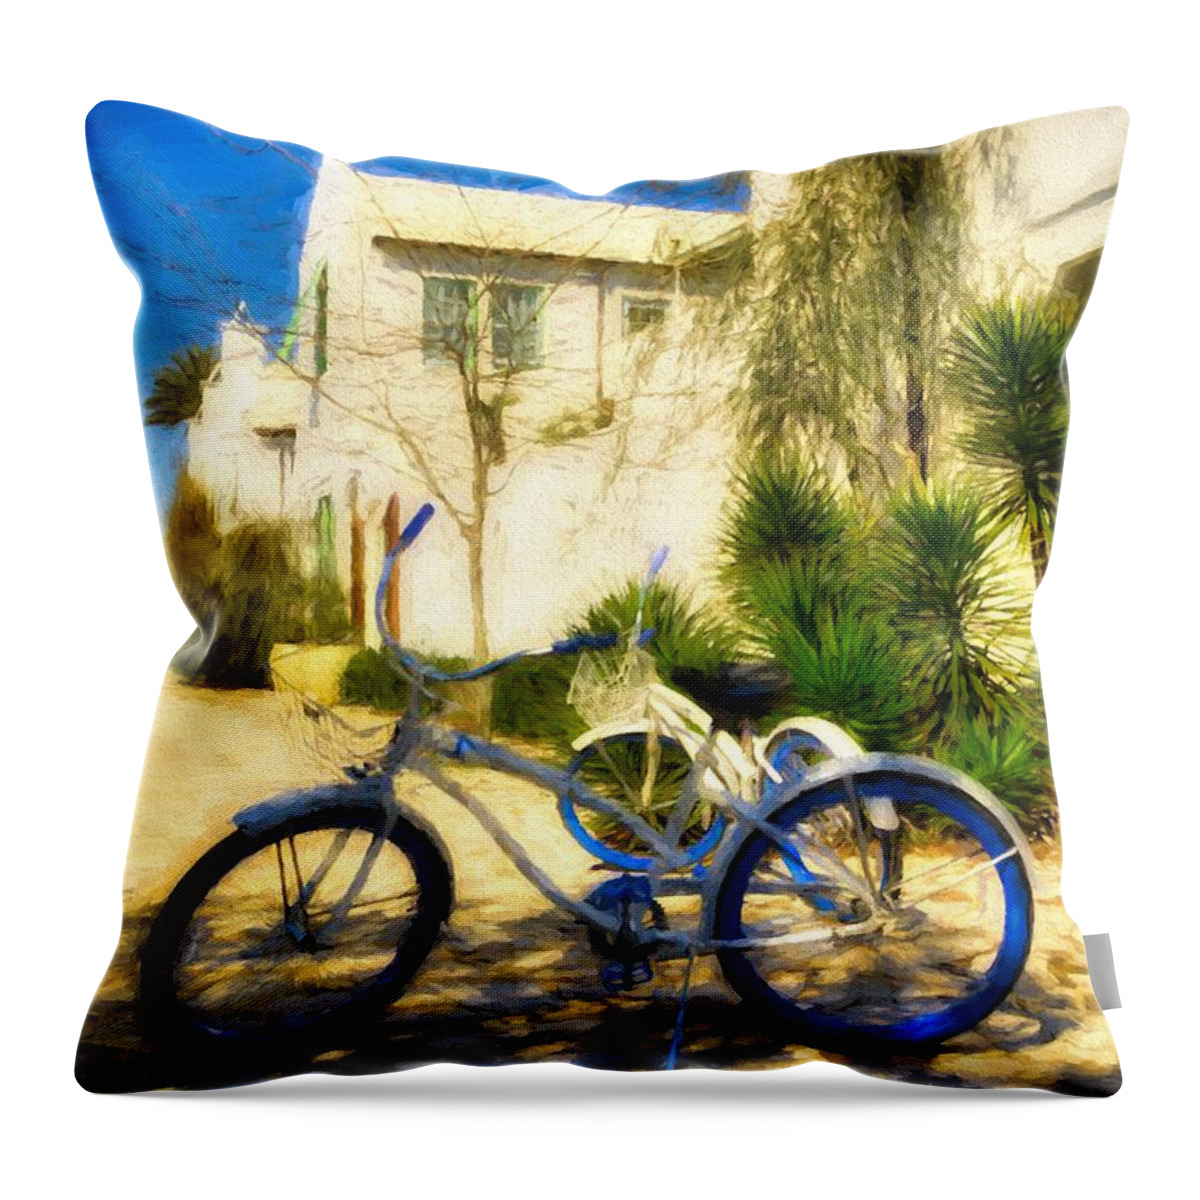 Scenes From Far And Near Throw Pillow featuring the photograph Florida Panhandle Peddler # 2 by Mel Steinhauer